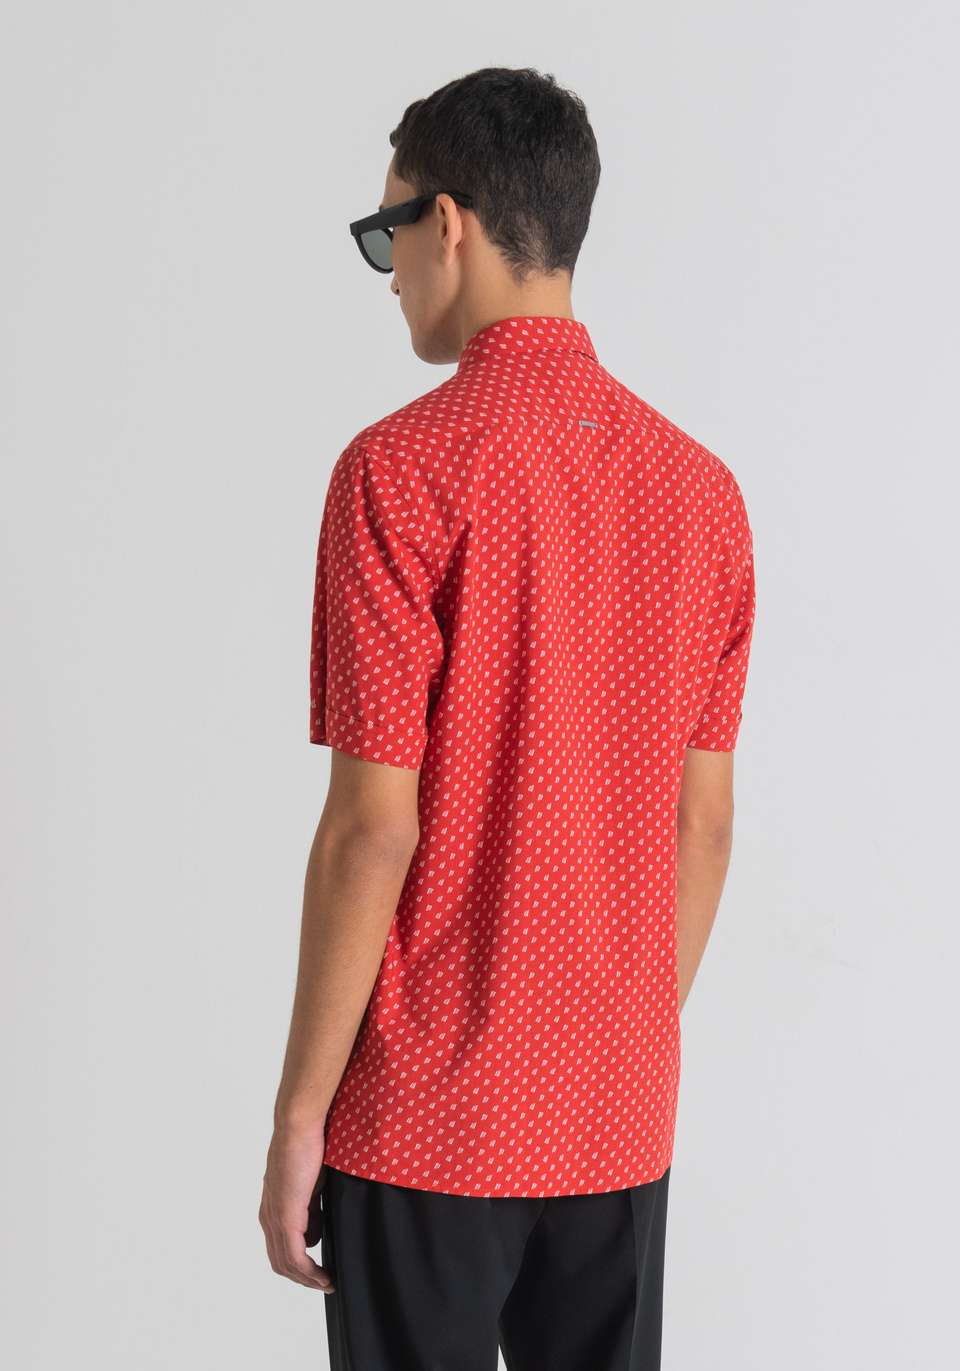 REGULAR STRAIGHT-FIT SHORT-SLEEVED SHIRT IN COTTON AND VISCOSE BLEND WITH MICRO PATTERN - Antony Morato Online Shop